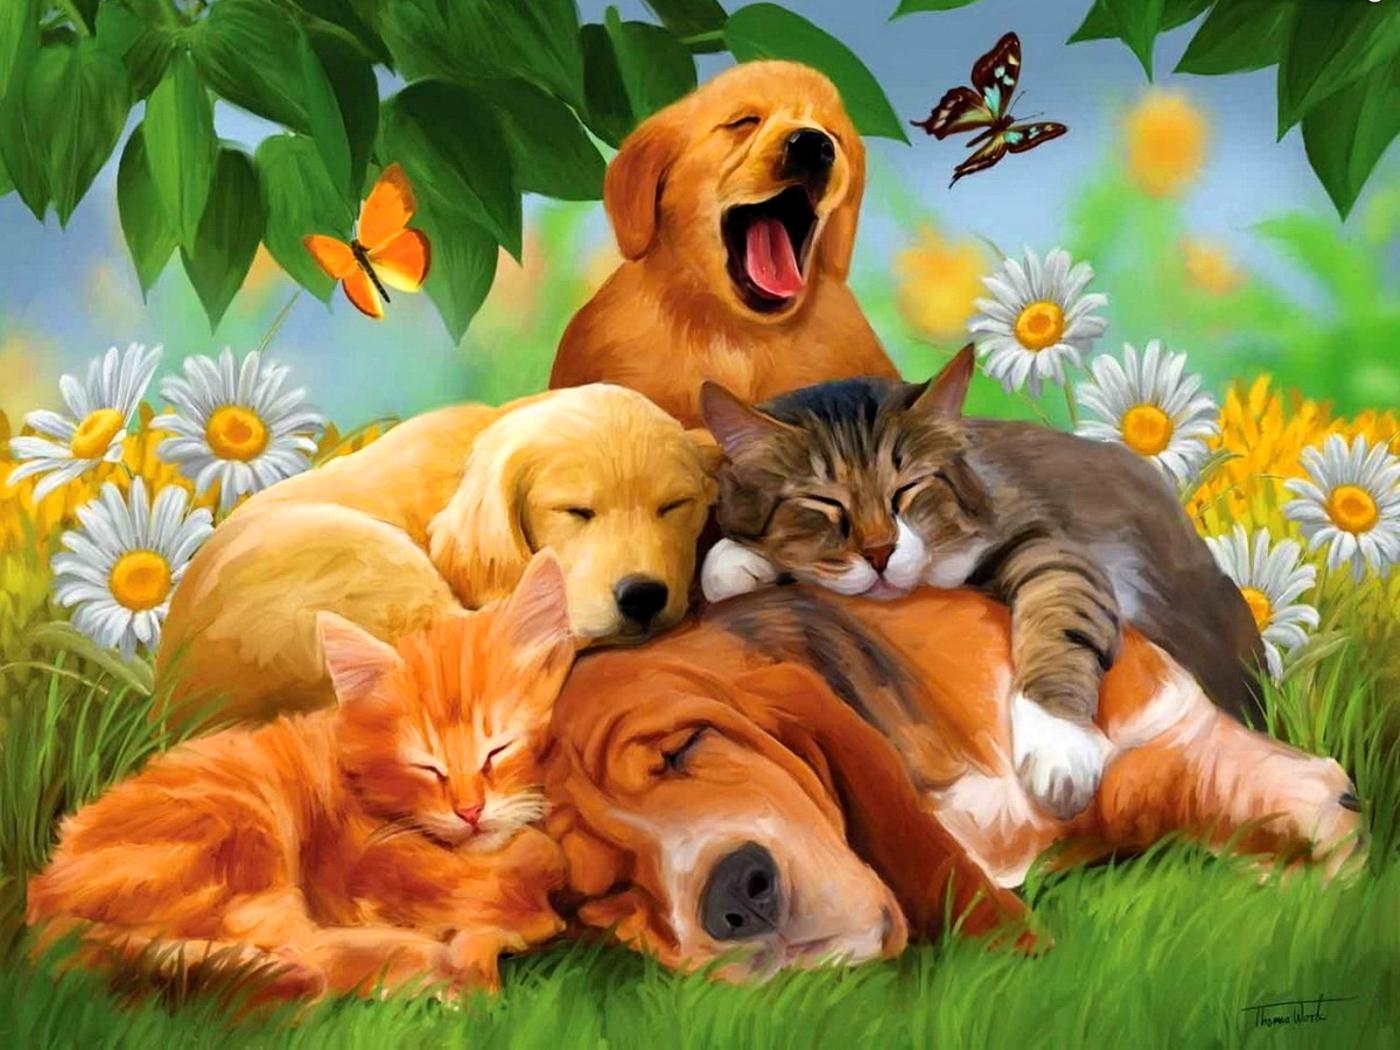 Cat and dogs Wallpaper Download